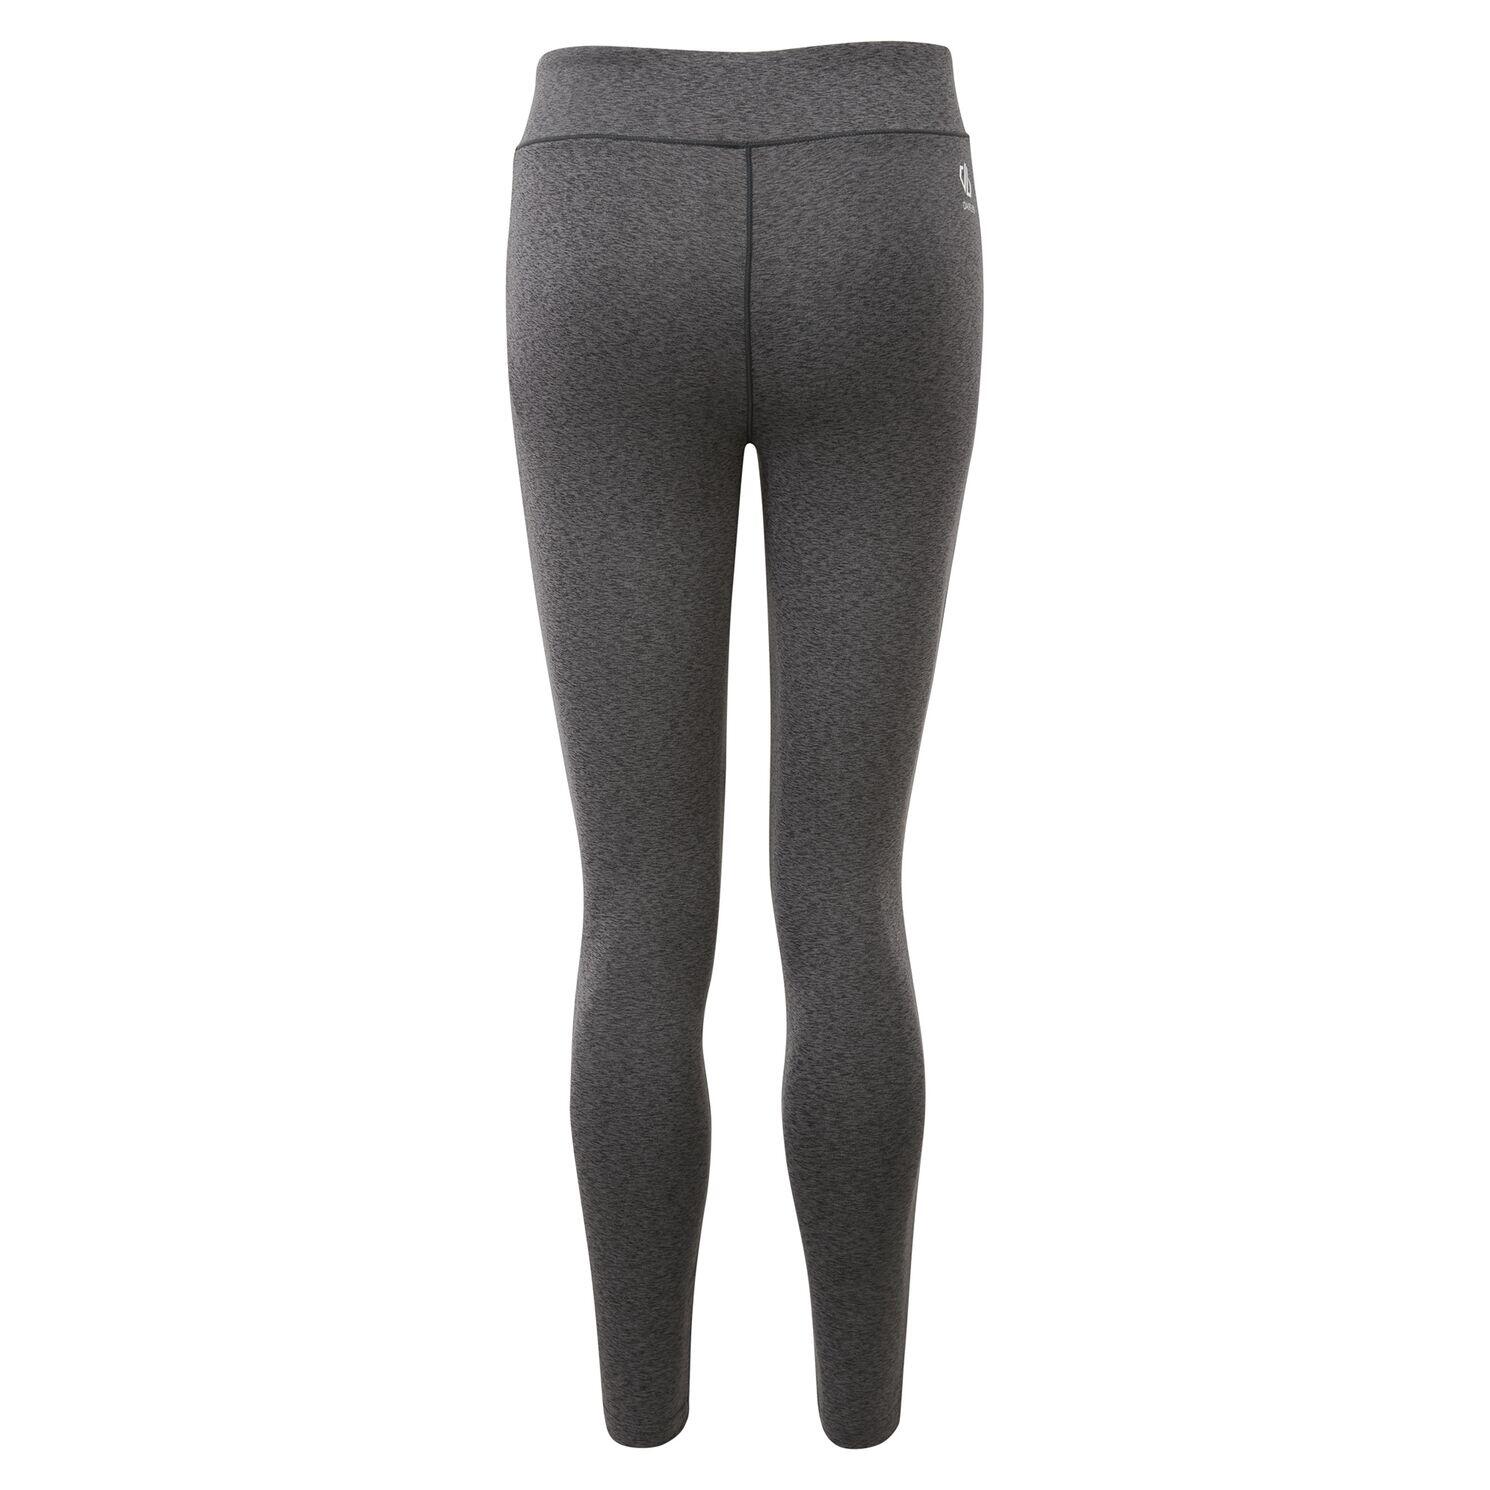 Womens/Ladies Influential Tight Lightweight Gym Leggings (Charcoal Grey) 2/4